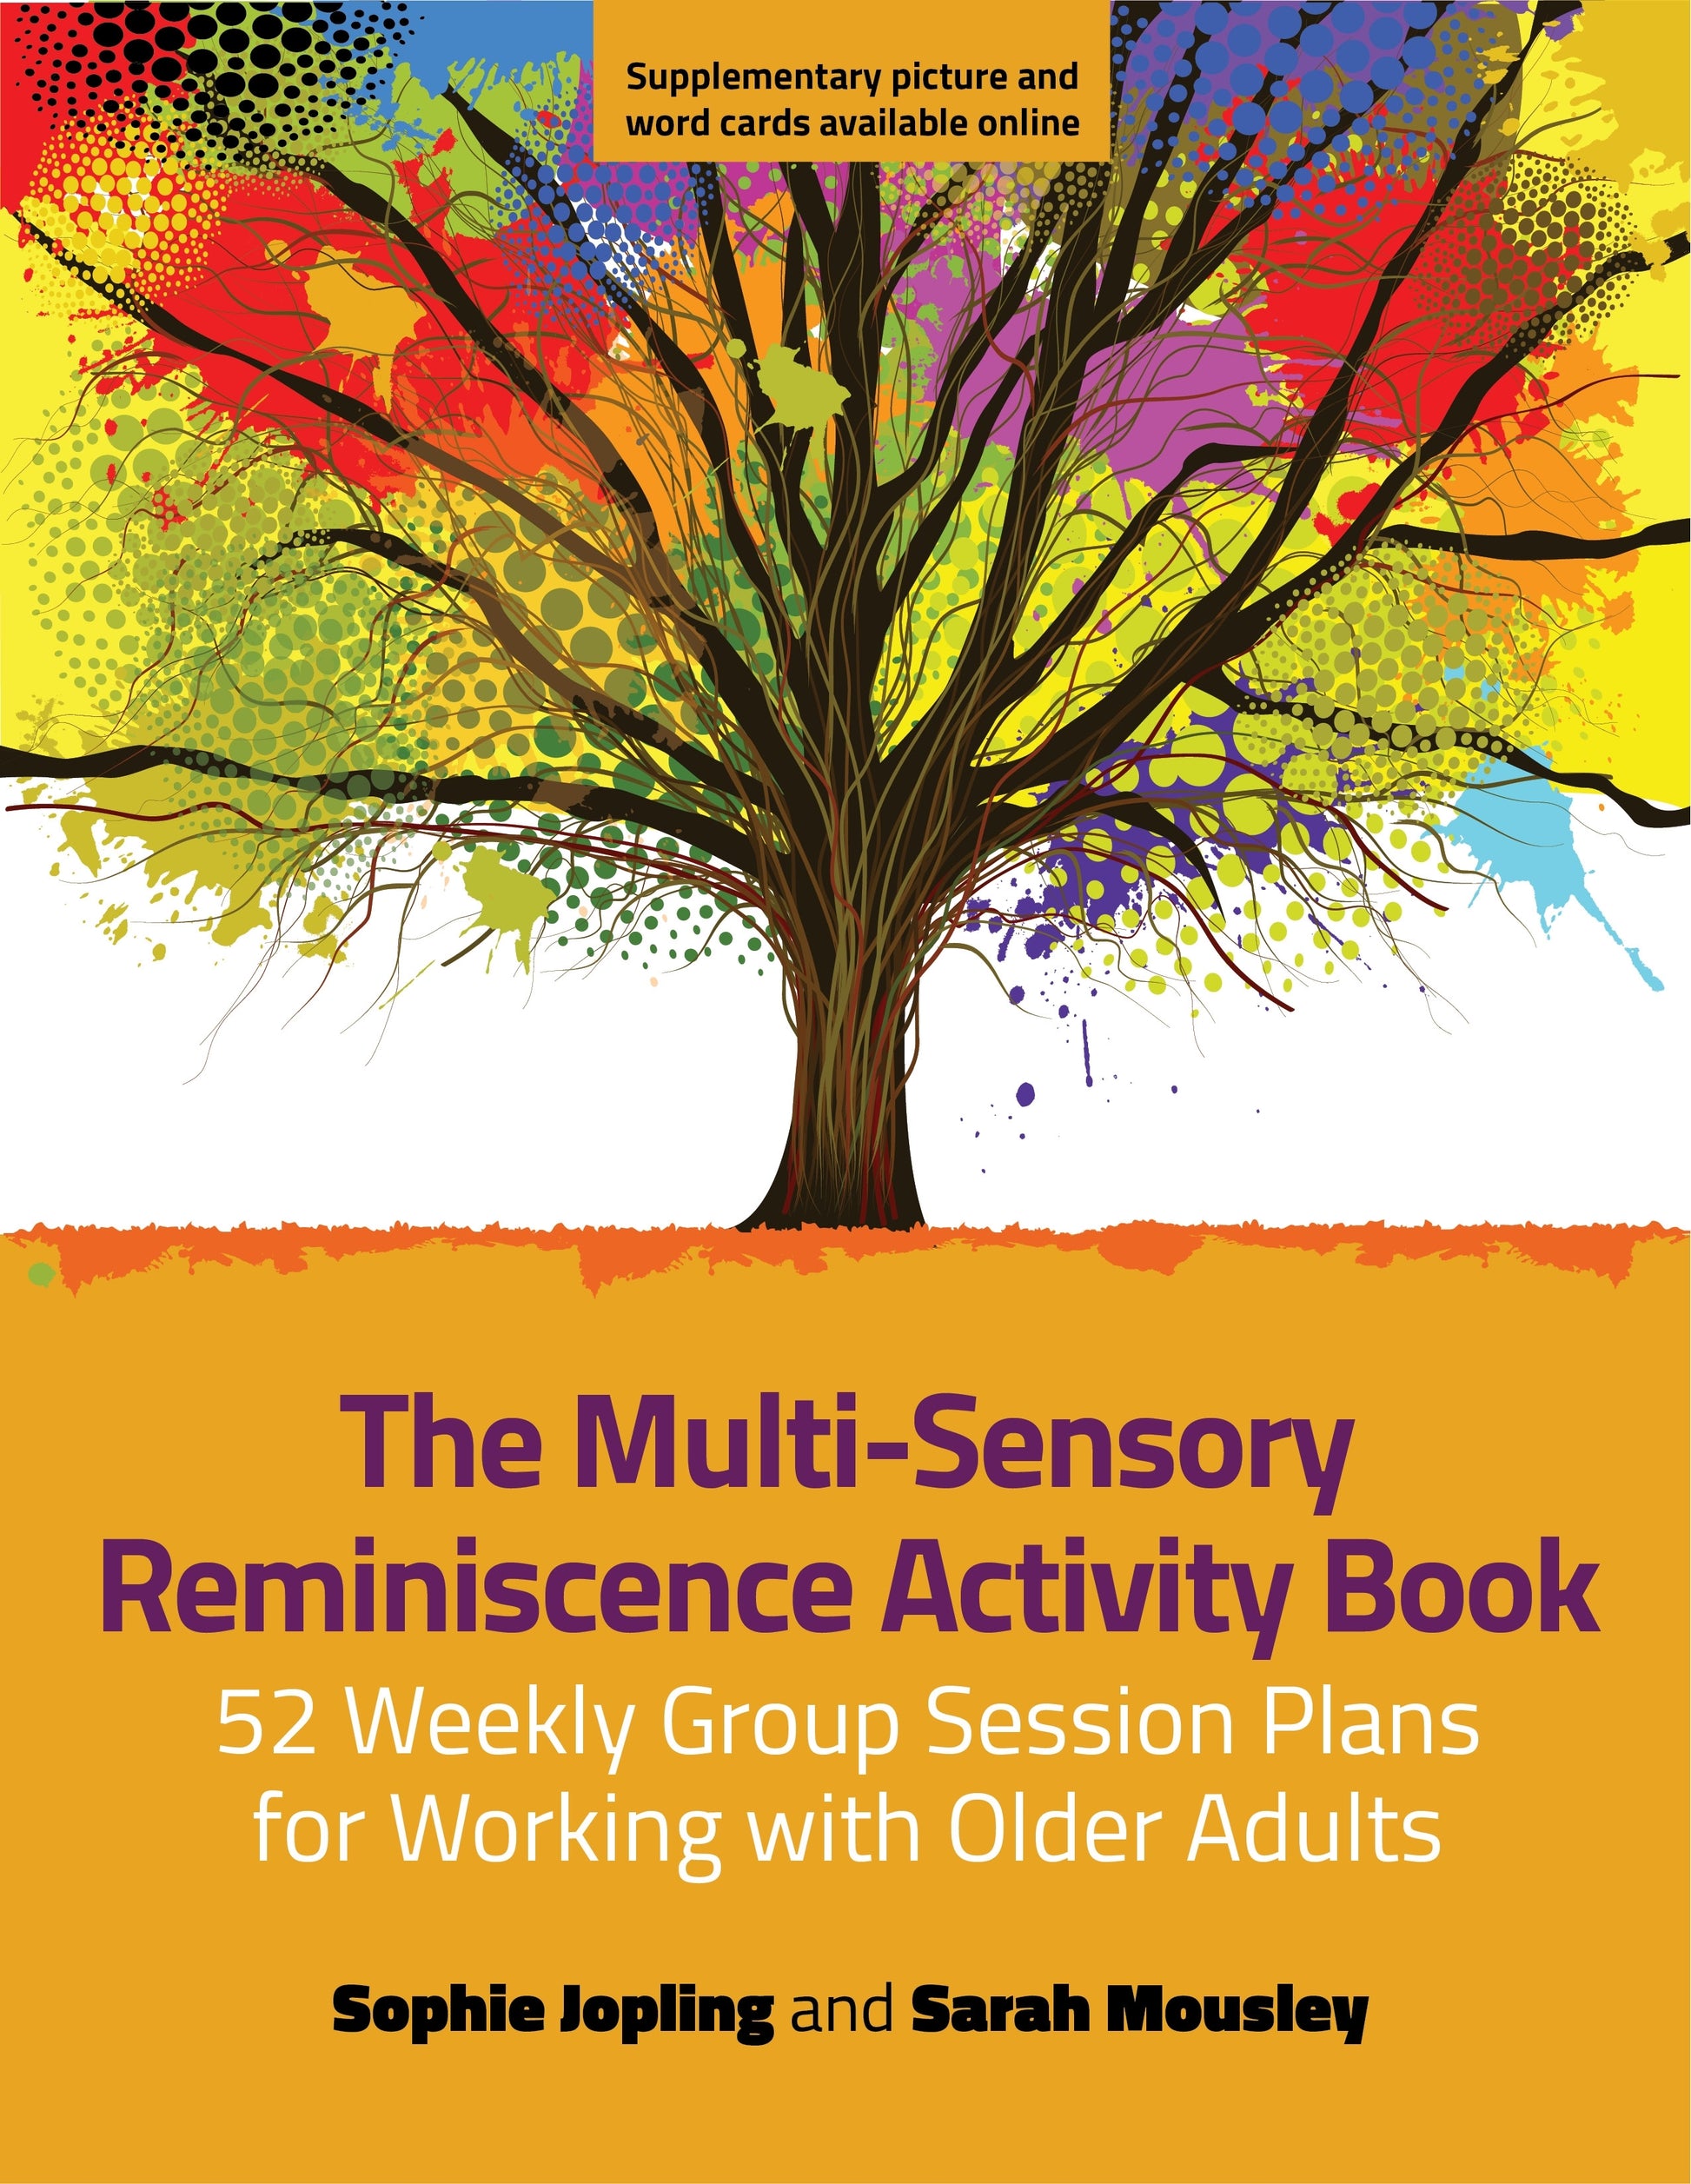 The Multi-Sensory Reminiscence Activity Book by Sophie Jopling, Sarah Mousley